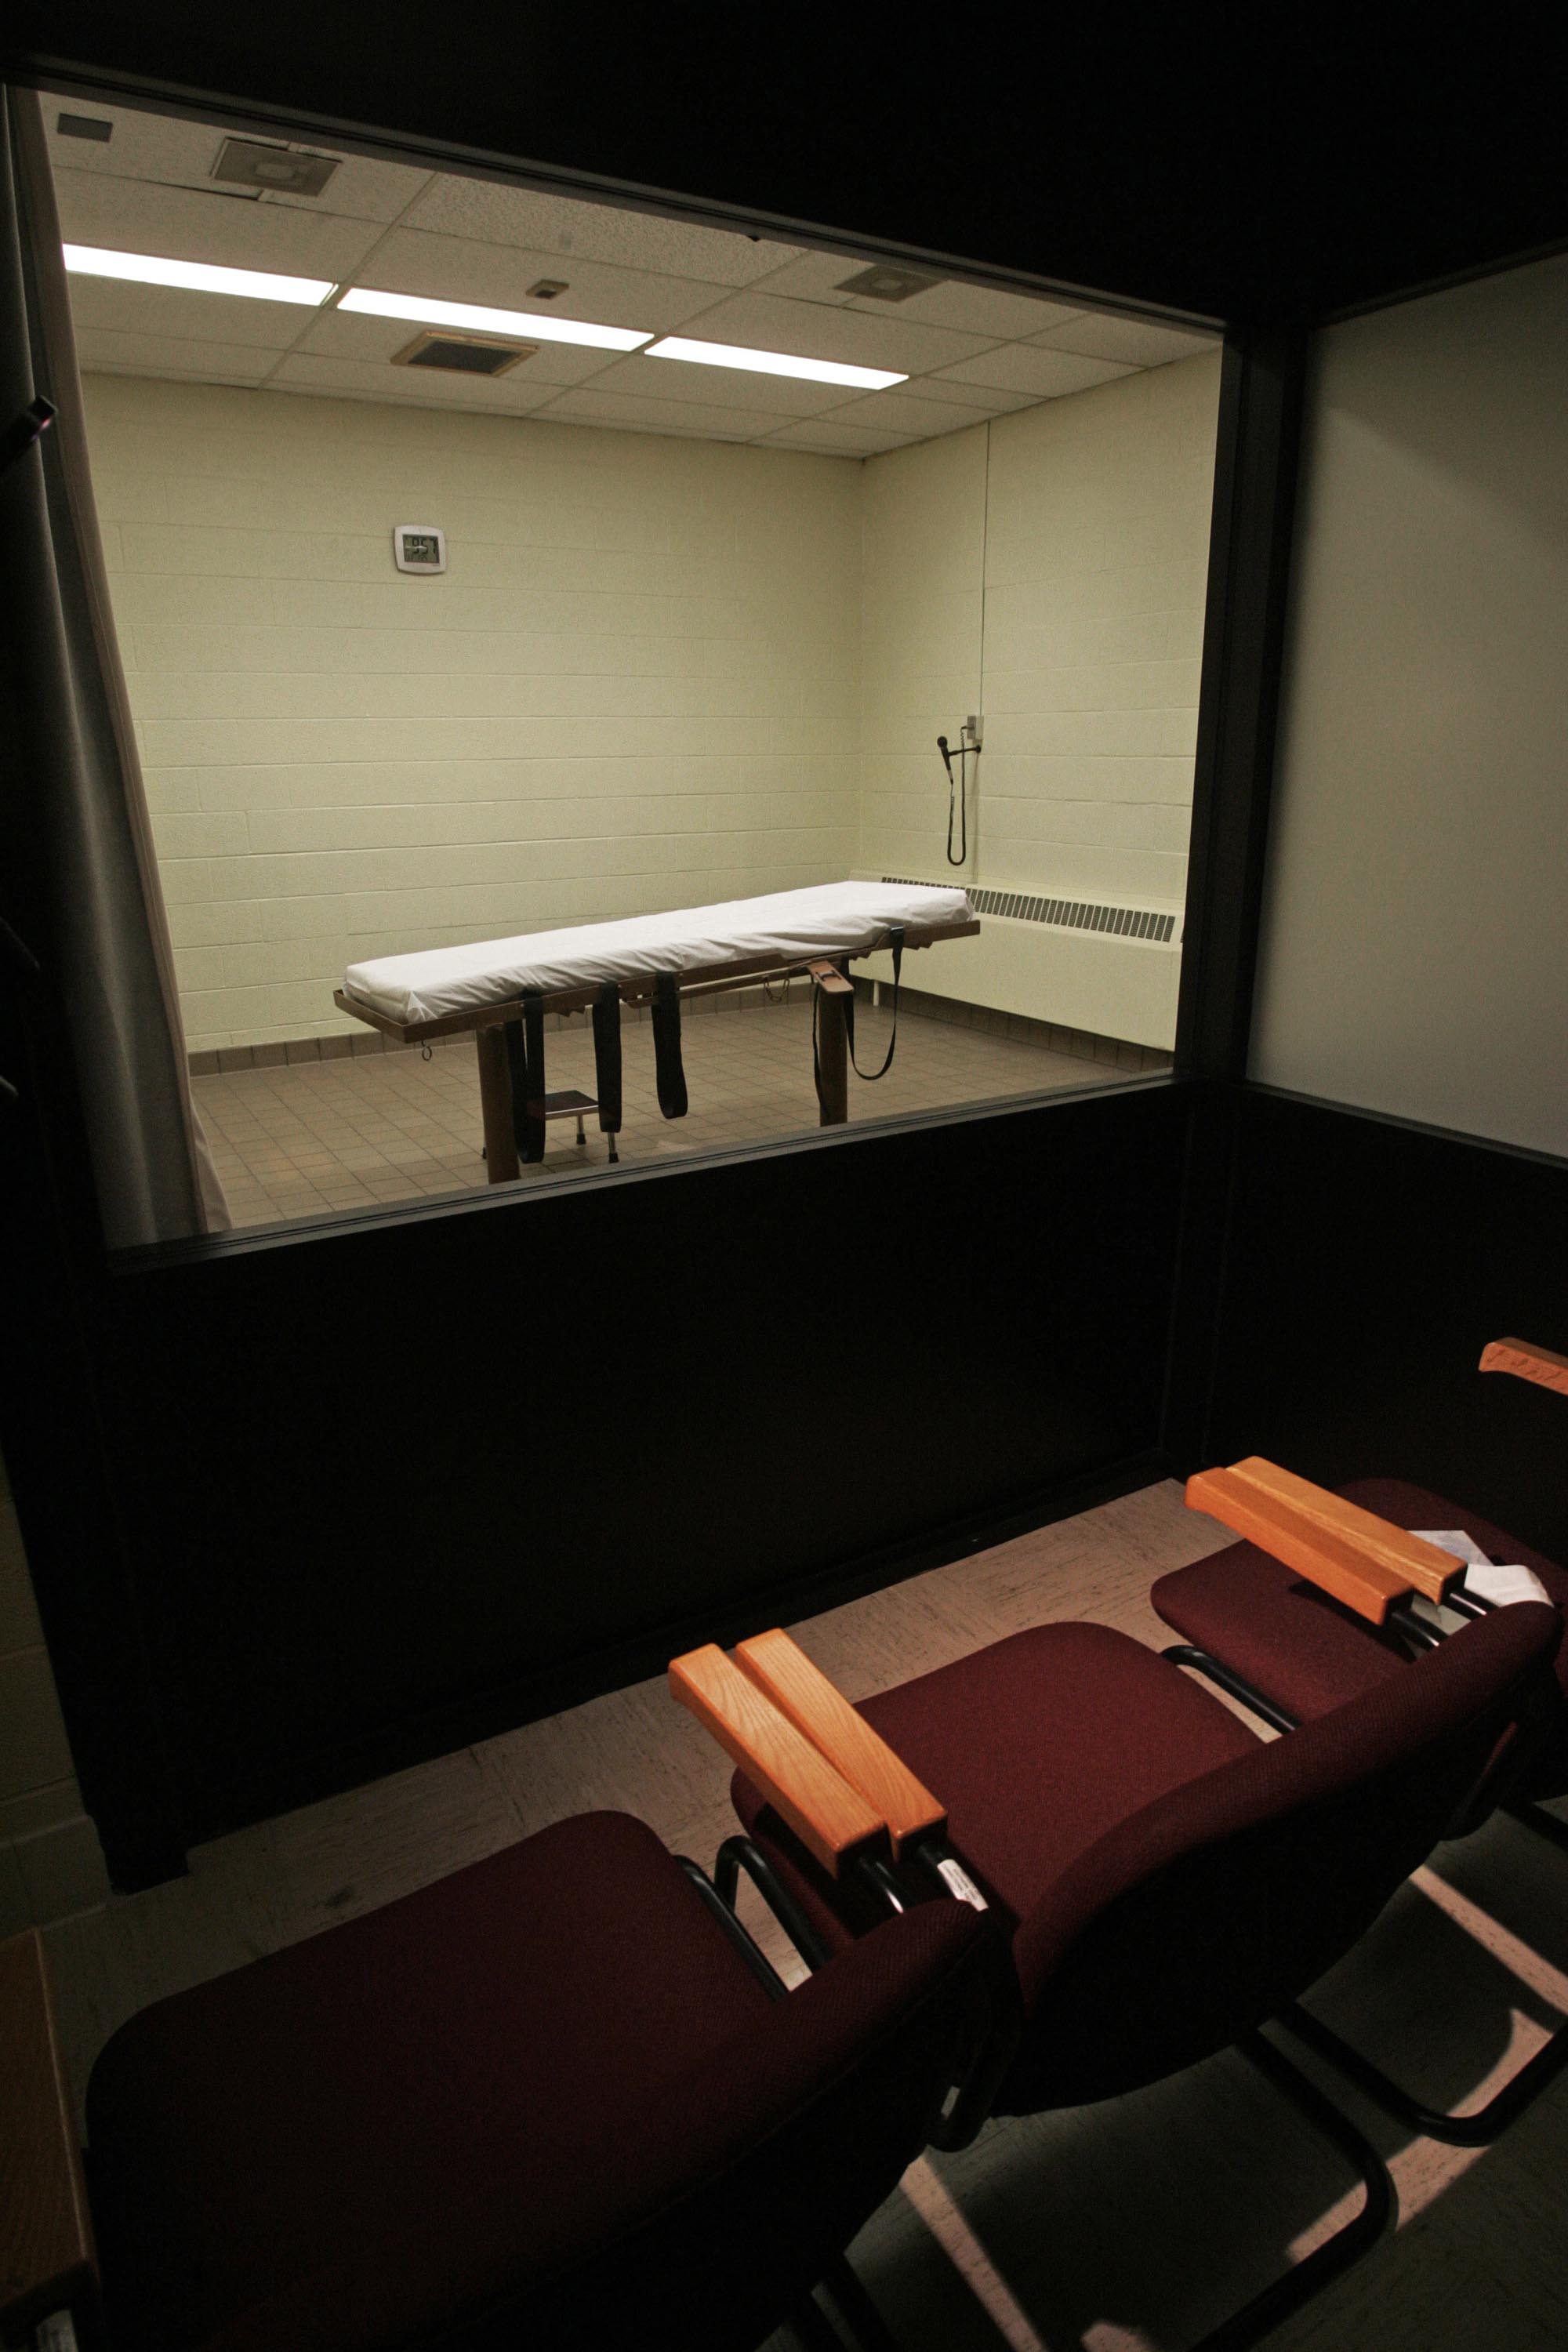 Final moments The viewing room at the Southern Ohio Correctional Facility looks onto the chamber where McGuire was executed (Kiichiro Sato—AP)